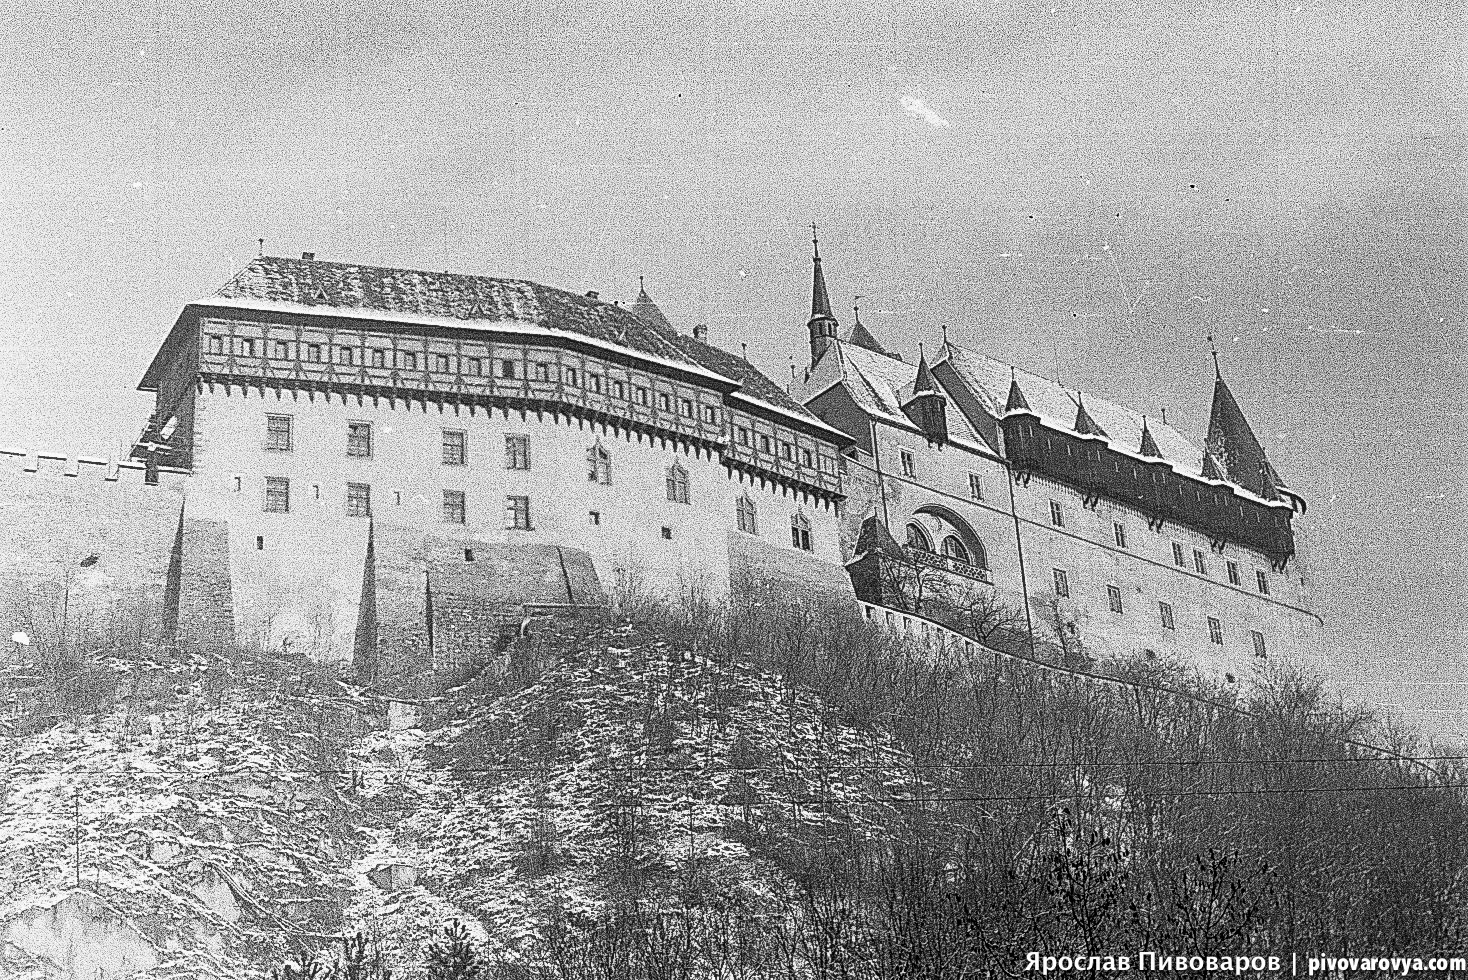 Old photographs of the Czech Republic